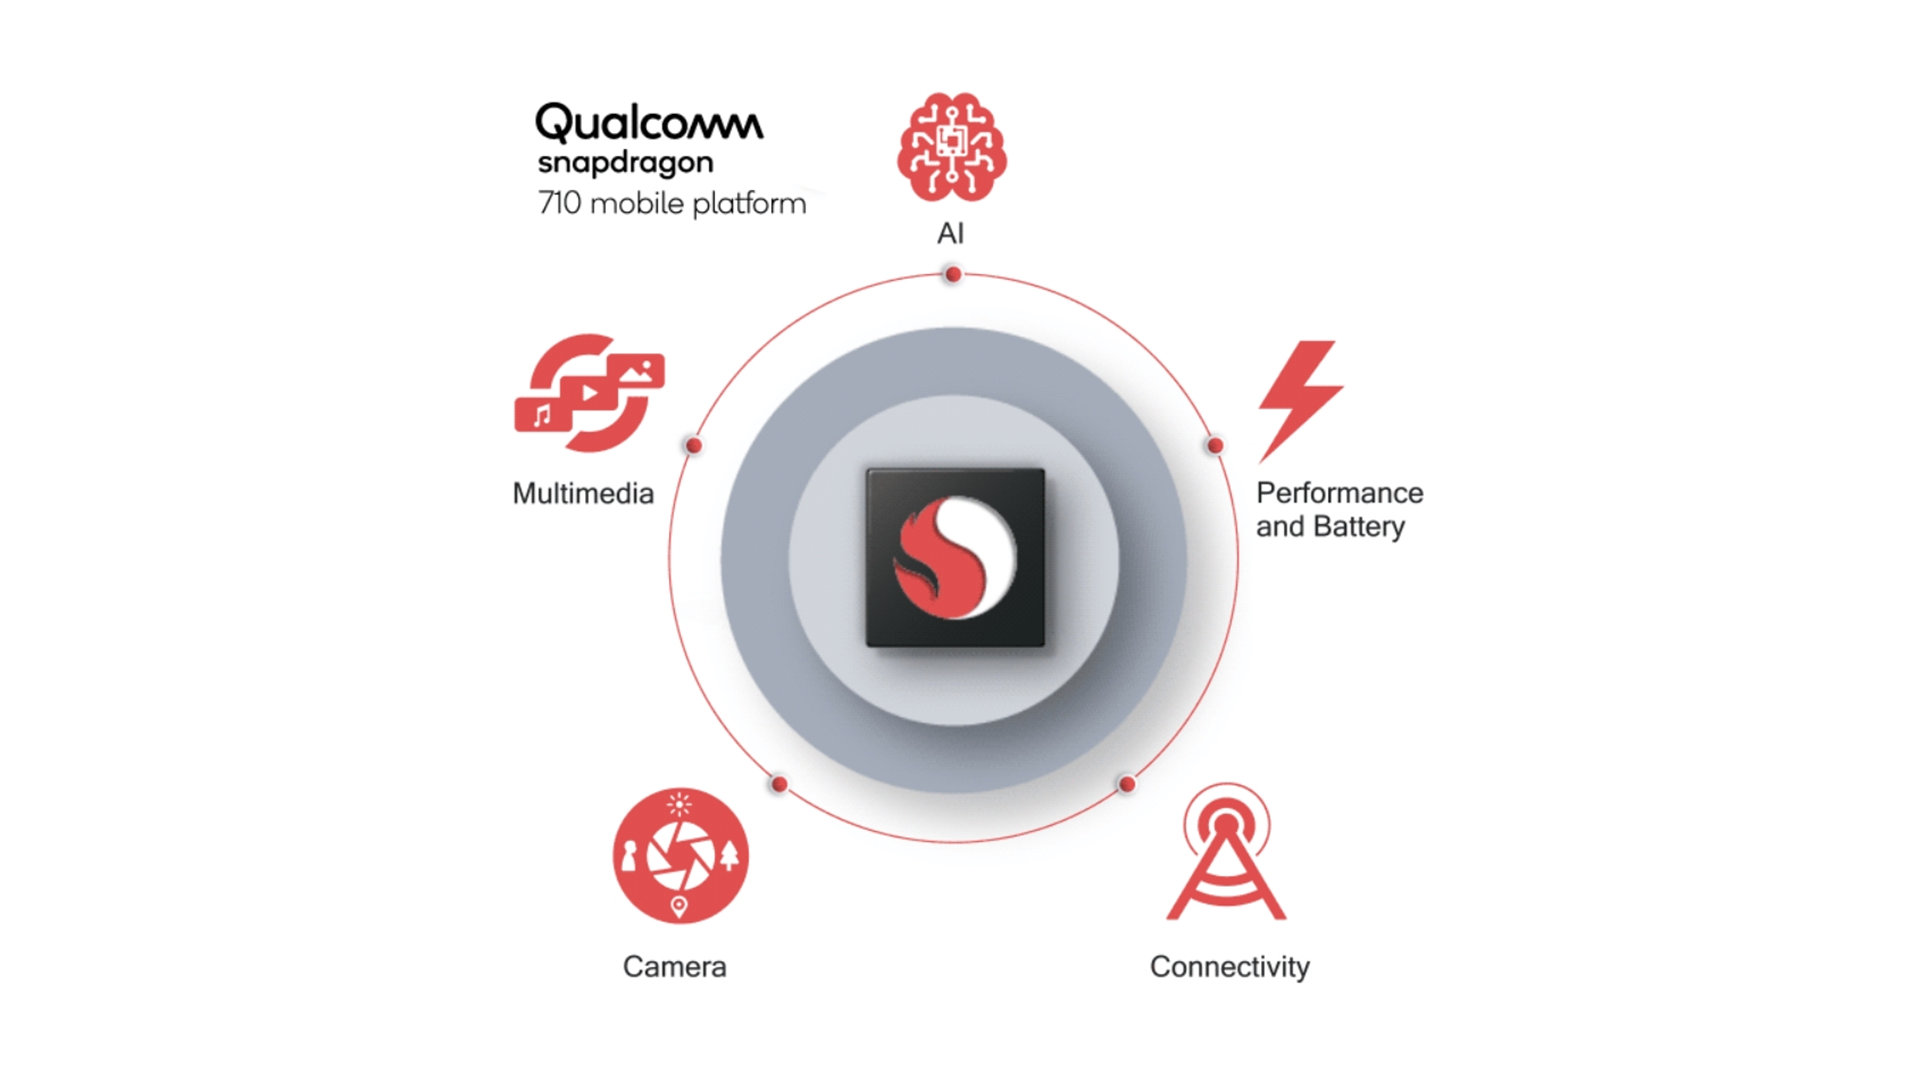 Snapdragon 710 Brings 10nm Process Technology To The Mid-range